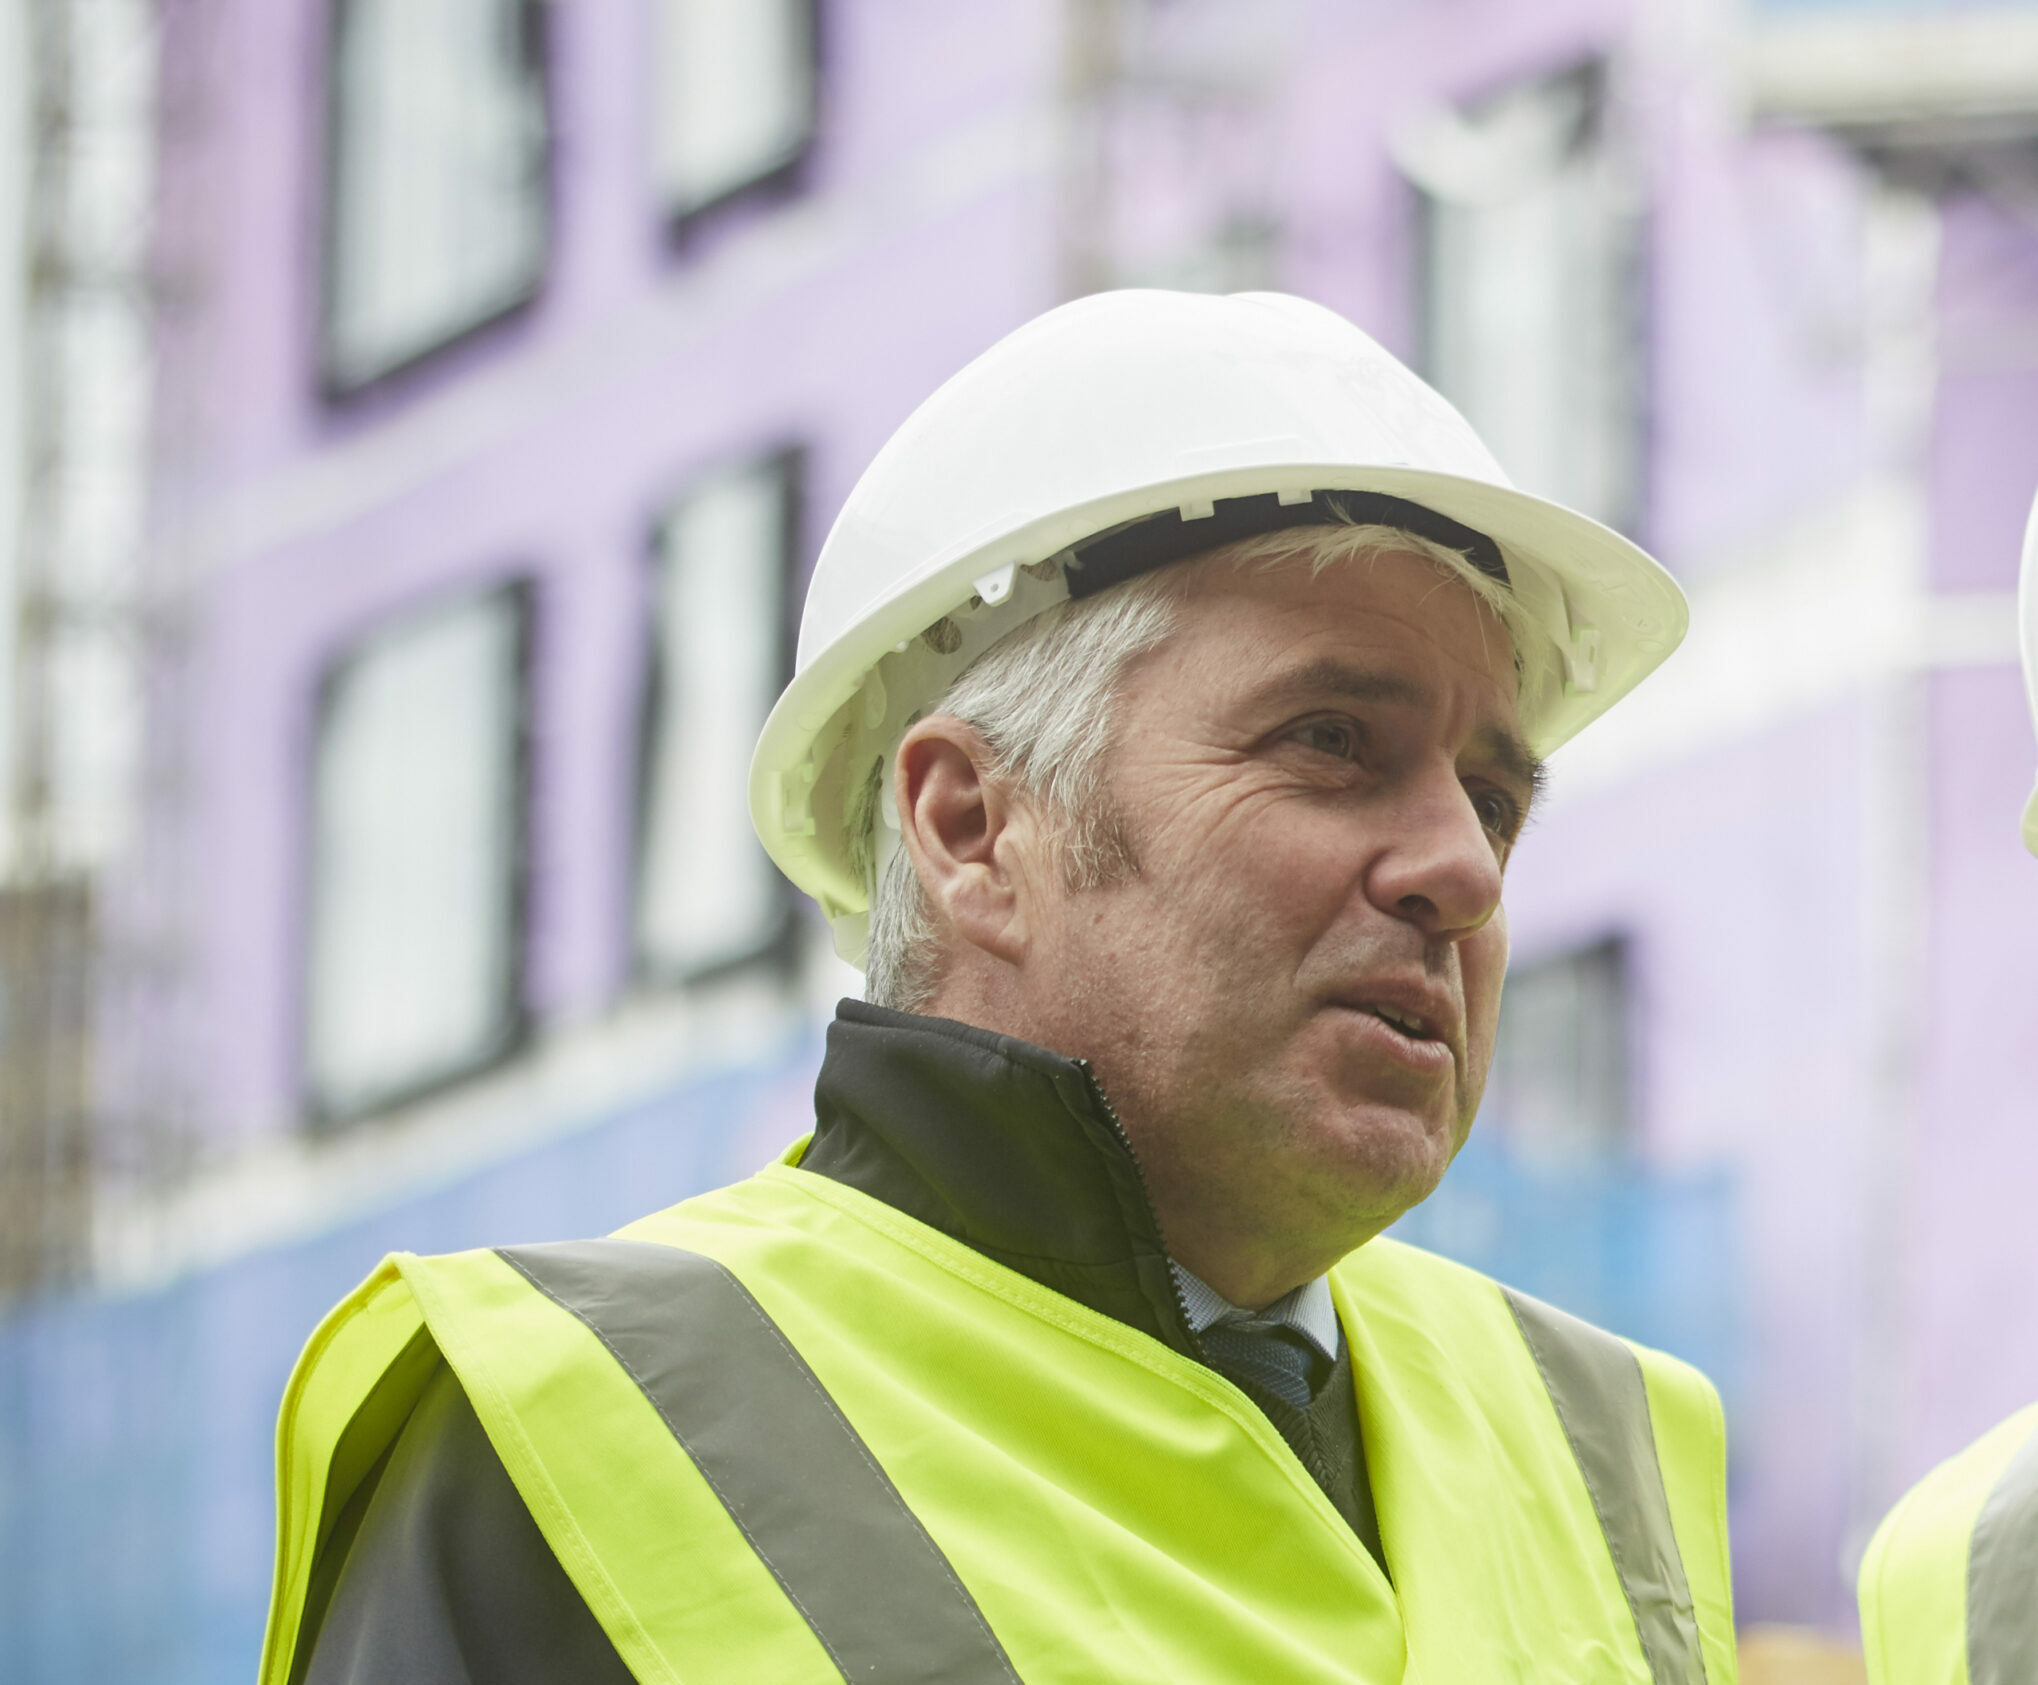 Construction project manager Martin Standley on a construction site